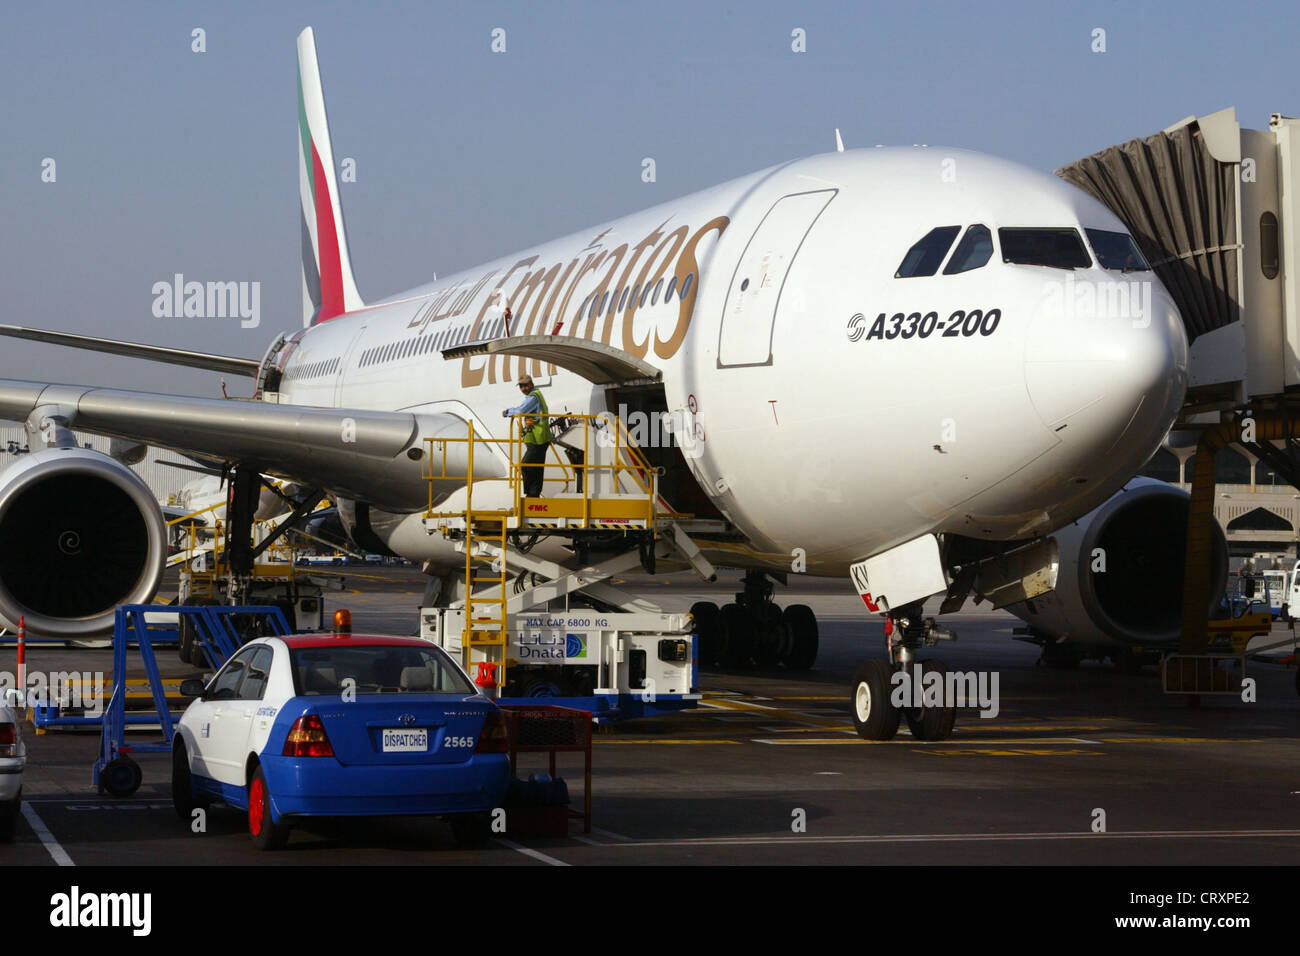 An Emirates Airlines plane at Dubai airport Stock Photo